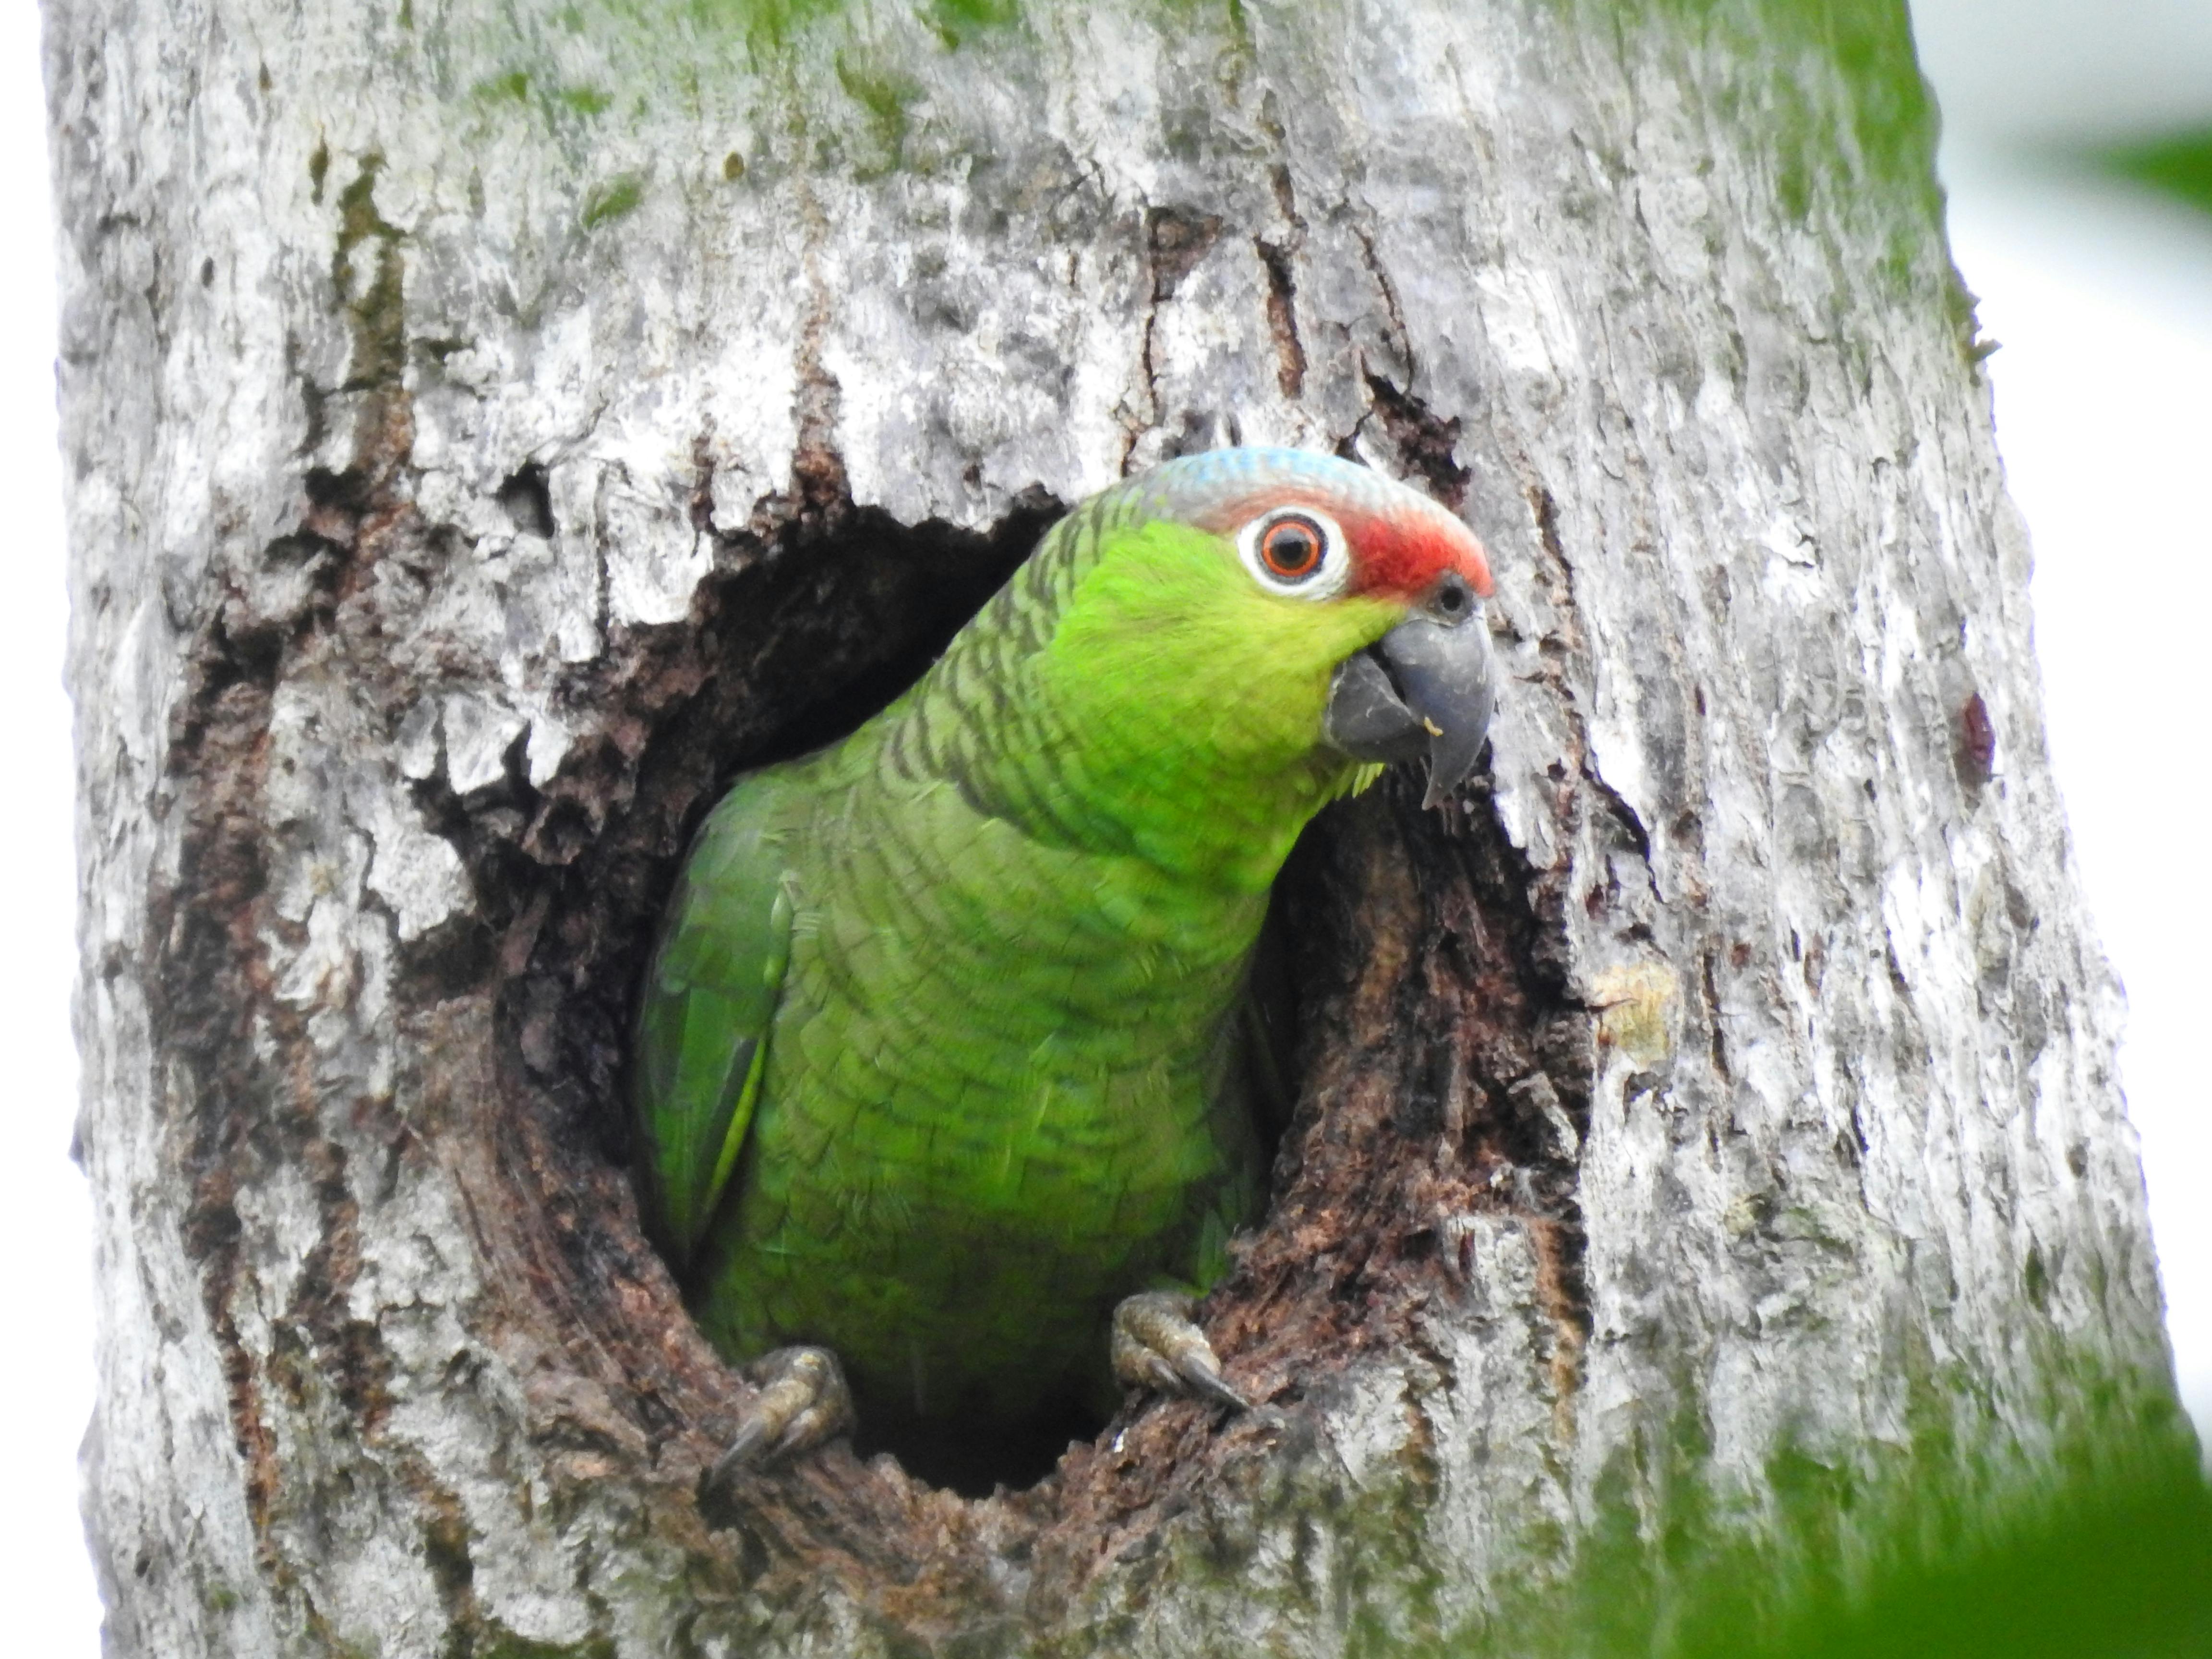 Fundación Jocotoco and the Las Balsas community partner to protect the highly threatened Lilacine Amazon parrot